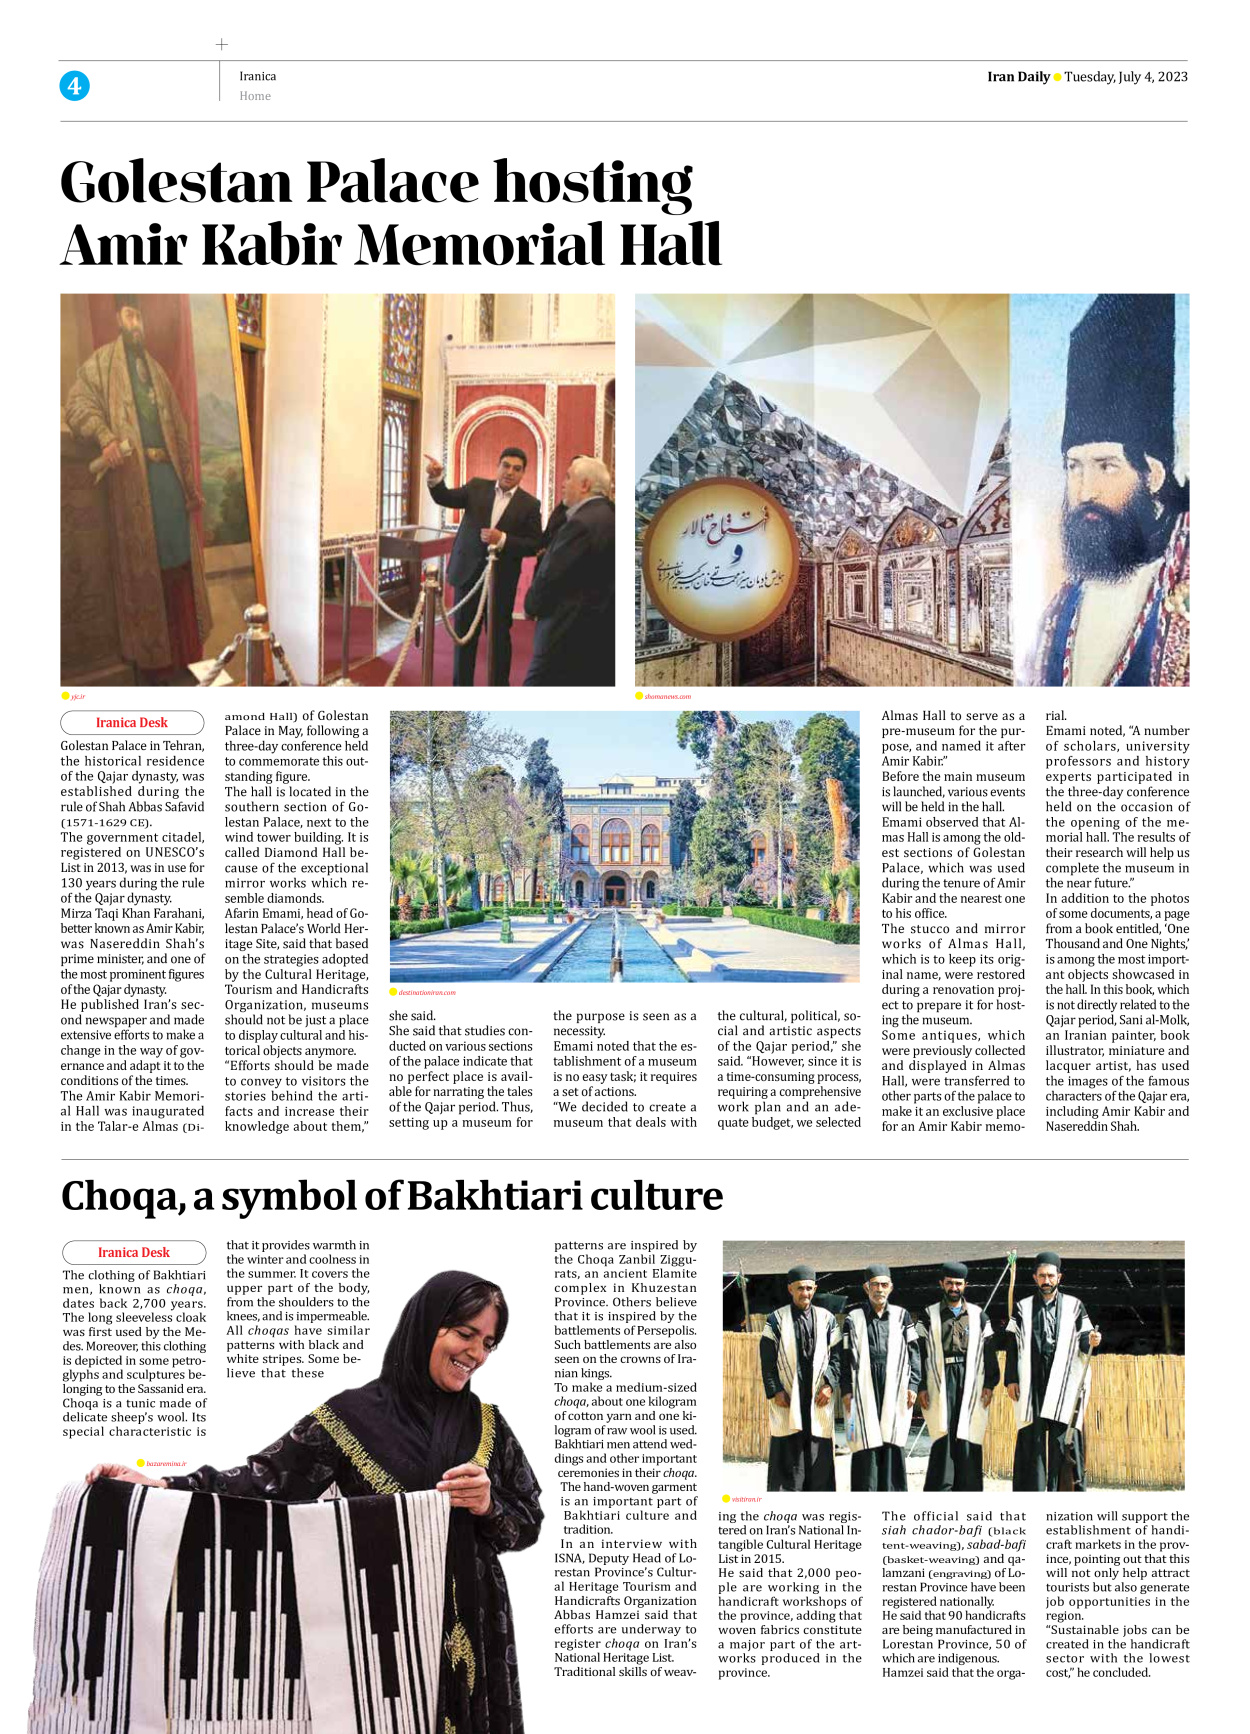 Iran Daily - Number Seven Thousand Three Hundred and Thirty - 04 July 2023 - Page 4